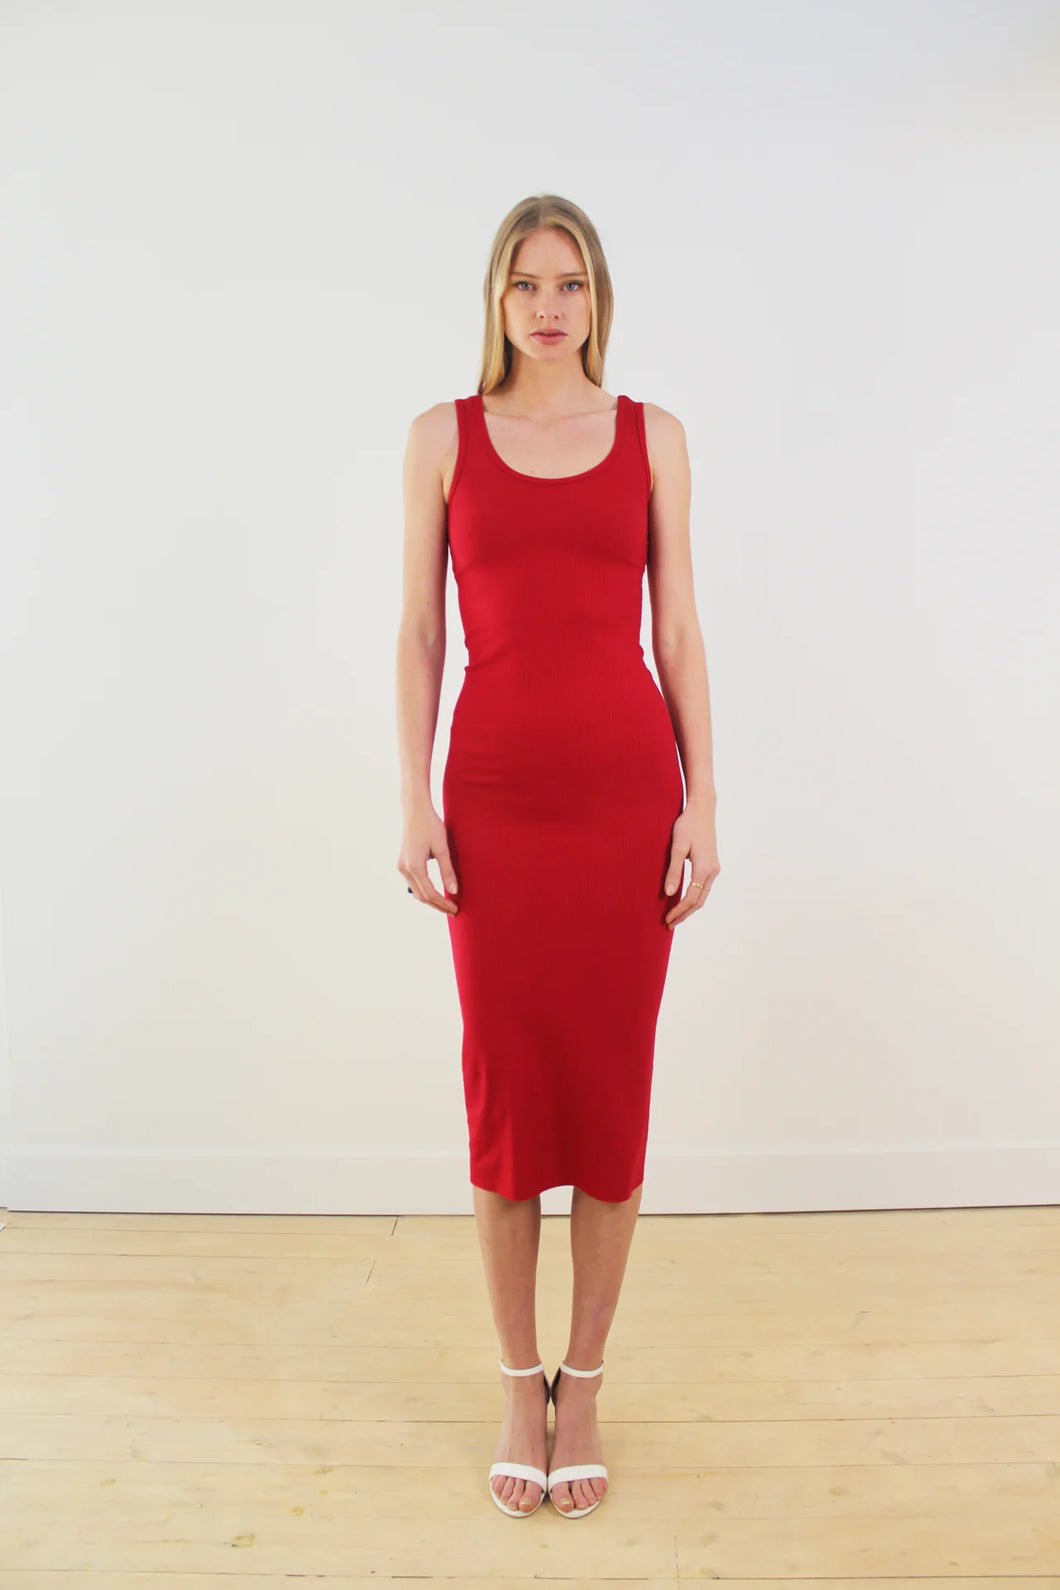 Fitted ribbed dress in red. Valentines Day styles.Sustainable bamboo clothing made in Vancouver BC. Eco friendly fabrics. Eco conscious fashion collection made in Vancouver BC. Most popular for fit and quality bamboo clothing made locally in Vancouver BC 